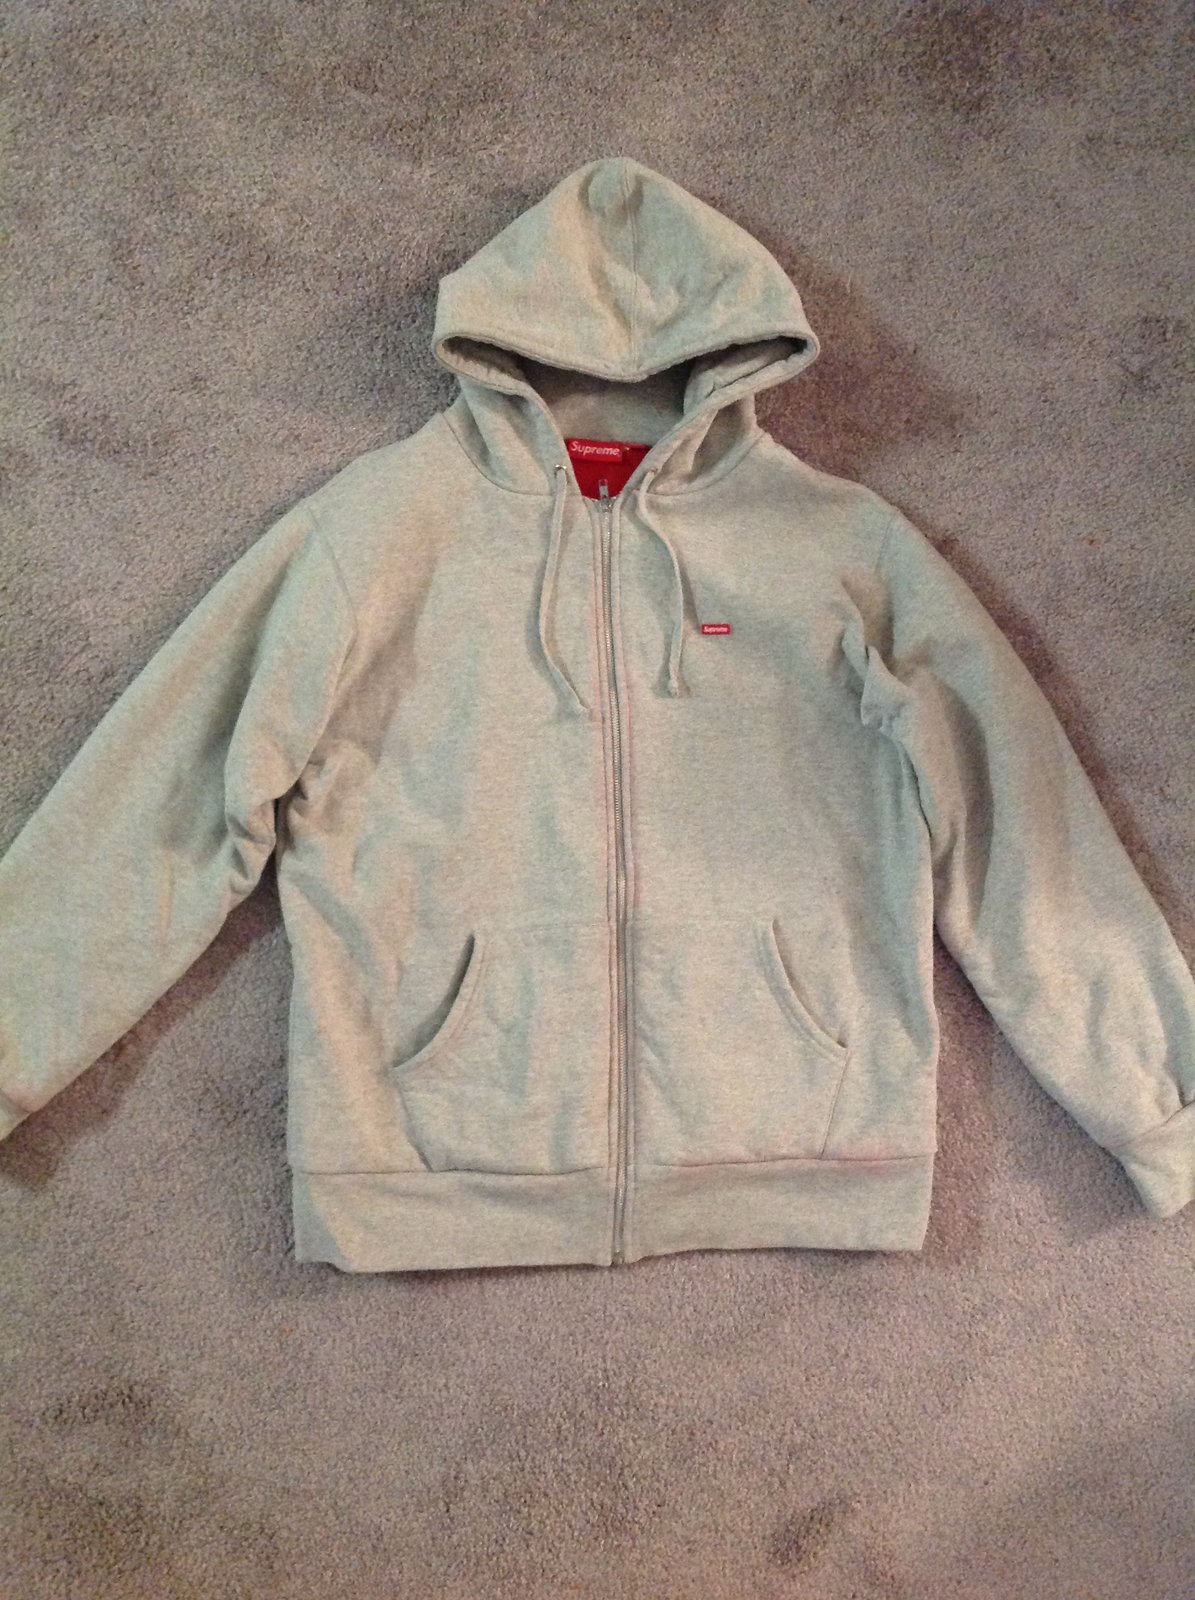 supreme hoodie size small